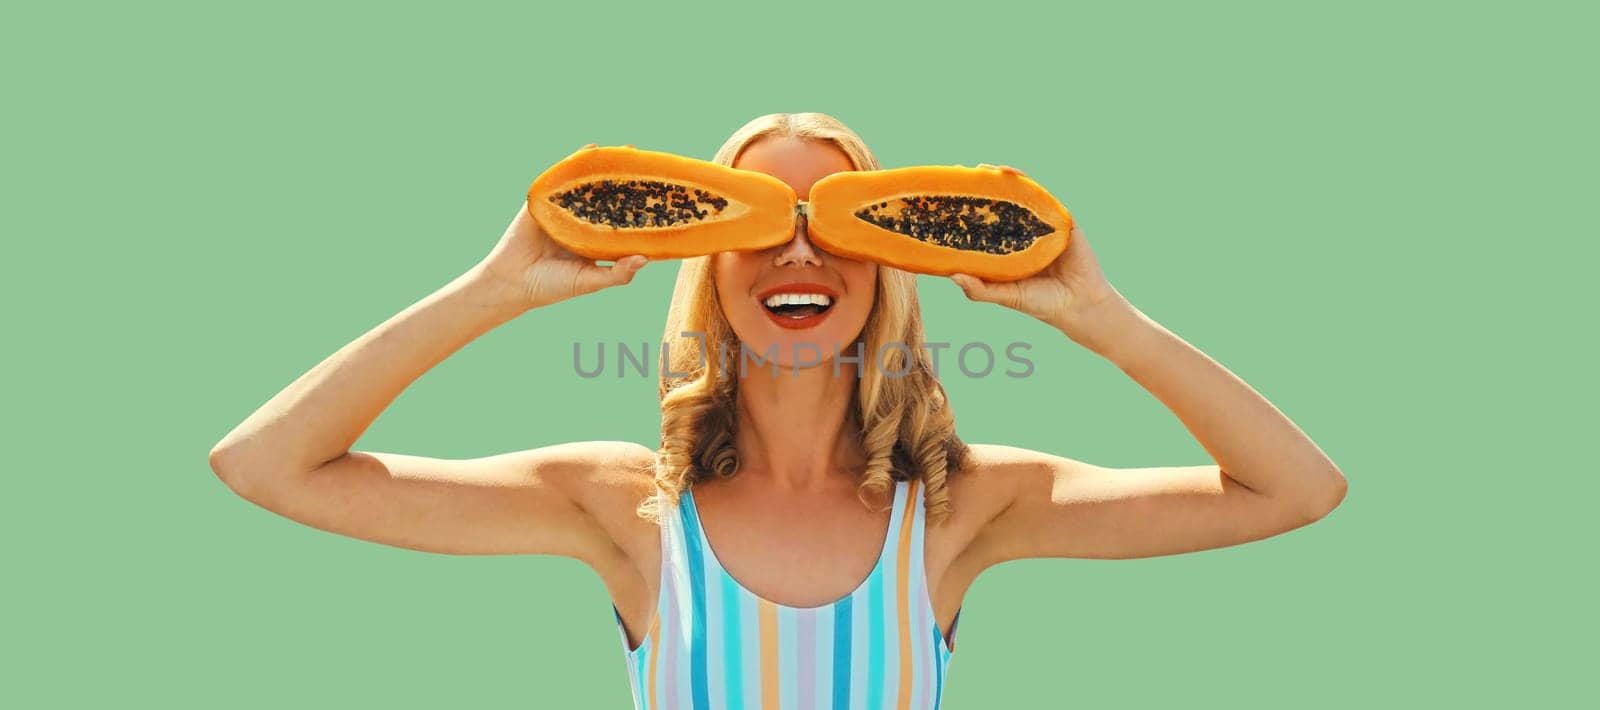 Summer portrait of happy cheerful laughing young woman posing with juicy papaya fruit on green background